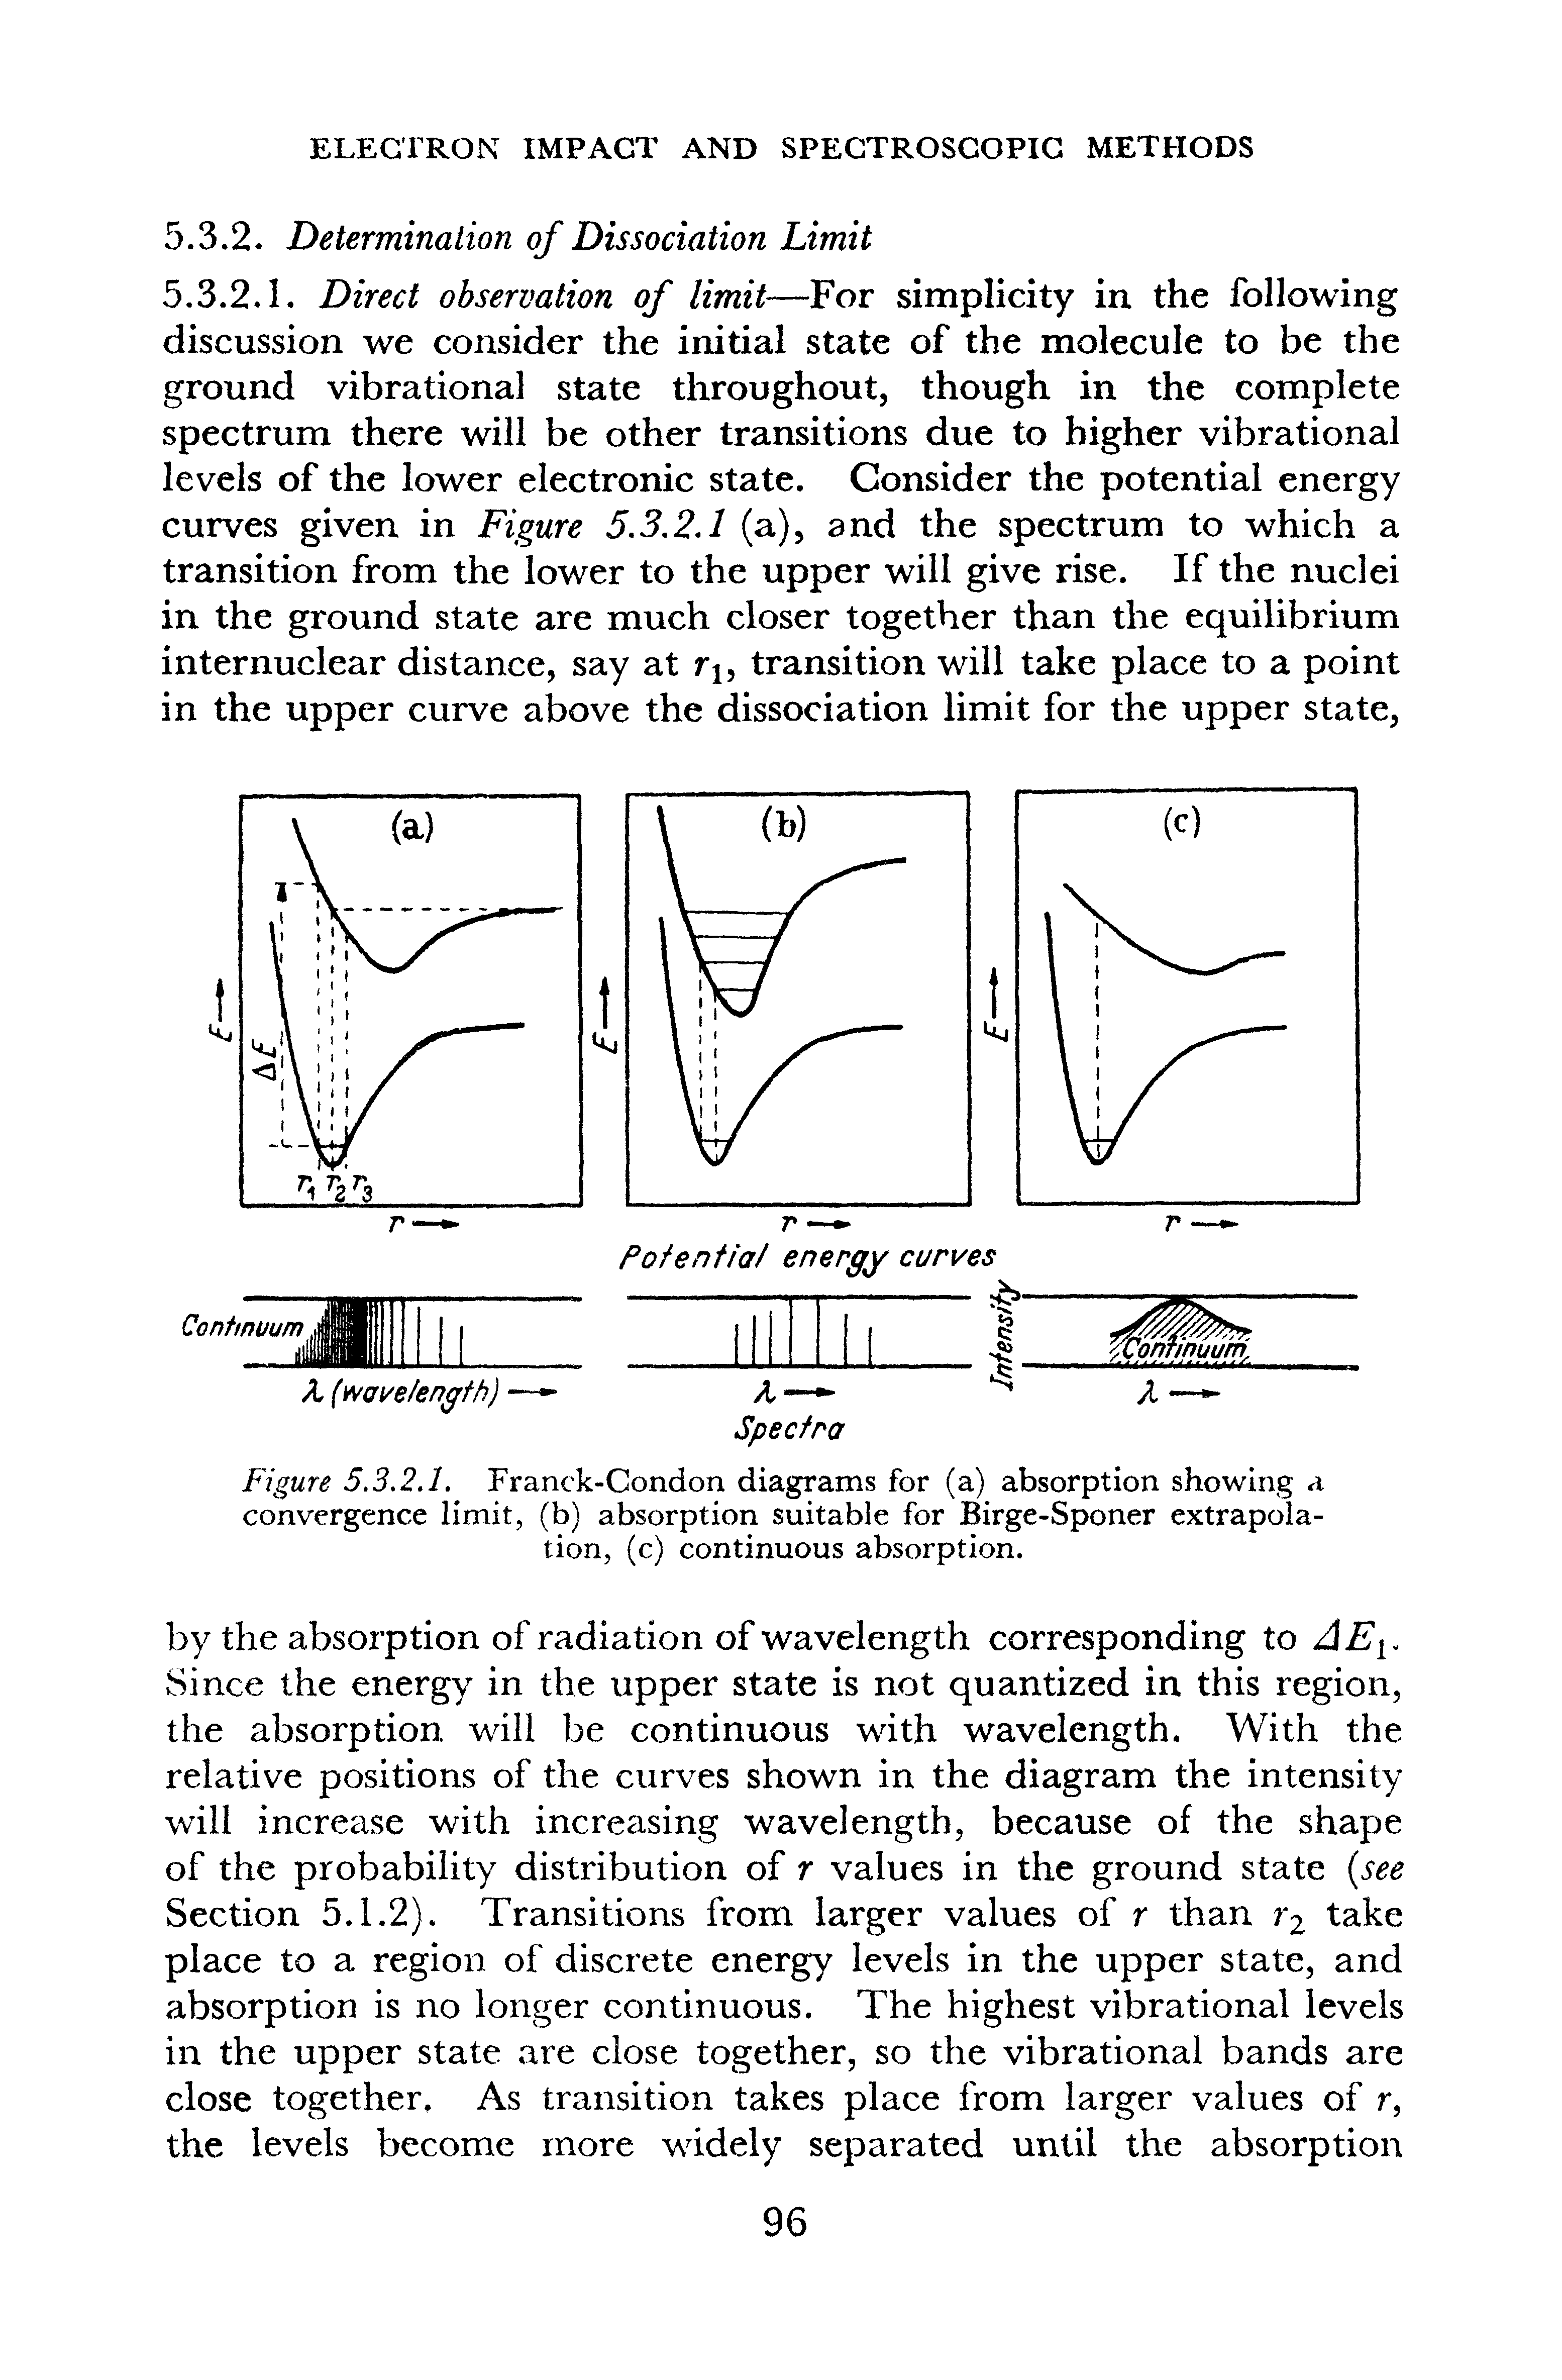 Figure 5,3.2.1. Franck-Condon diagrams for (a) absorption showing a convergence limit, (b) absorption suitable for Birge-Sponer extrapolation, (c) continuous absorption.